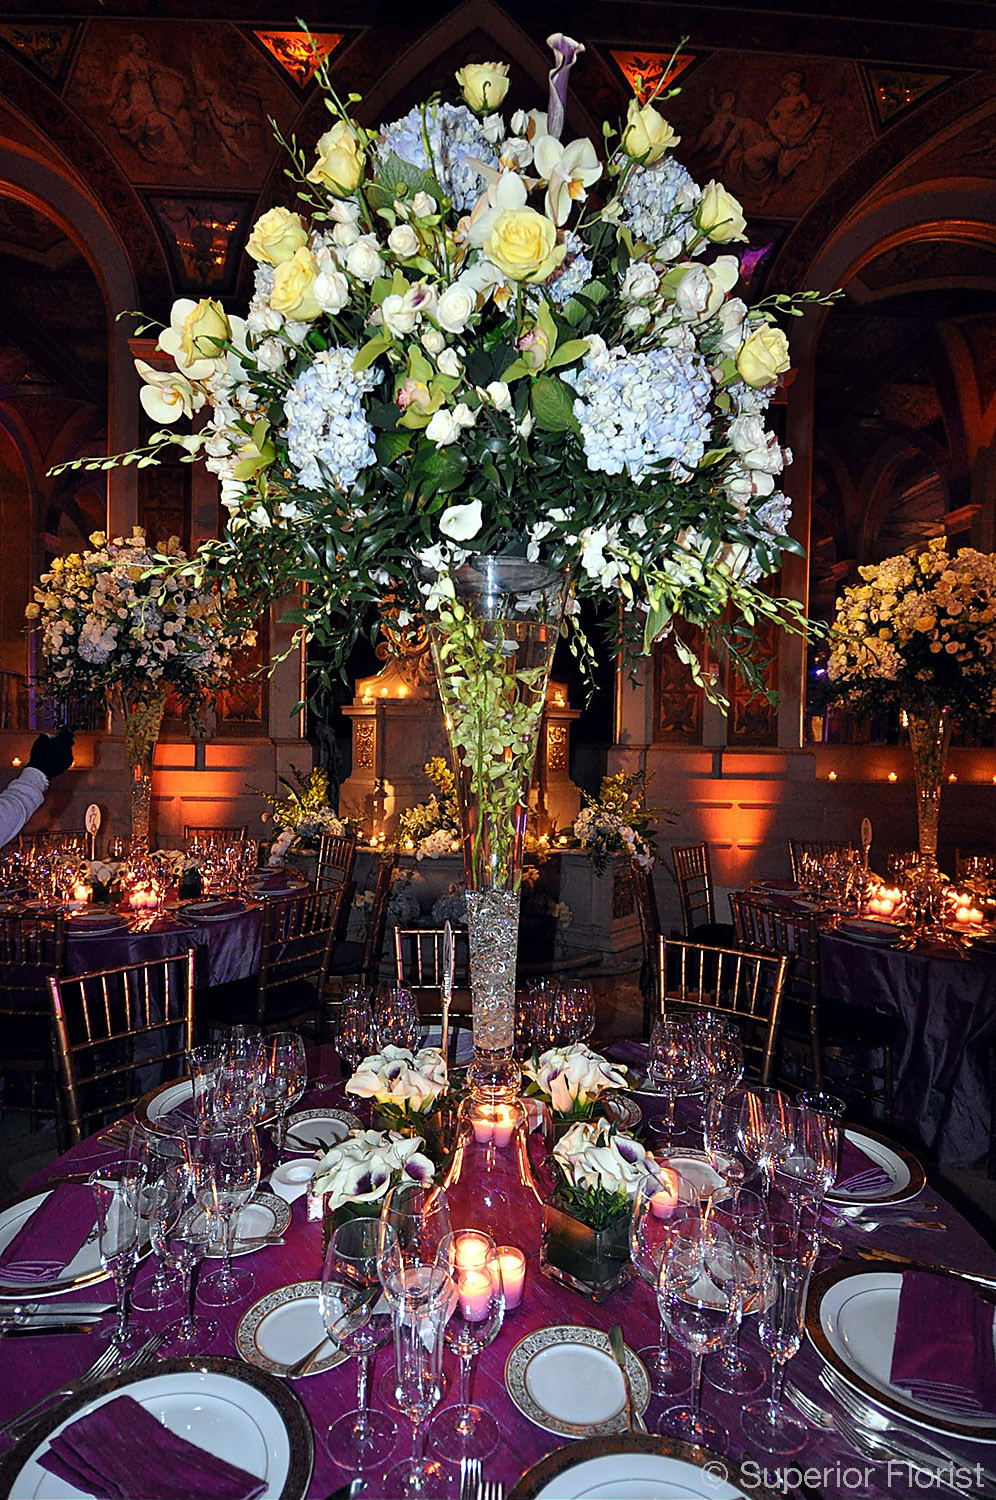 15 Fashionable Tall Wedding Vases for Sale 2024 free download tall wedding vases for sale of wedding flower arrangements tall vases flowers healthy within superior florist event fls centerpieces tall vase centerpiece ideas an extravagant dinner table a